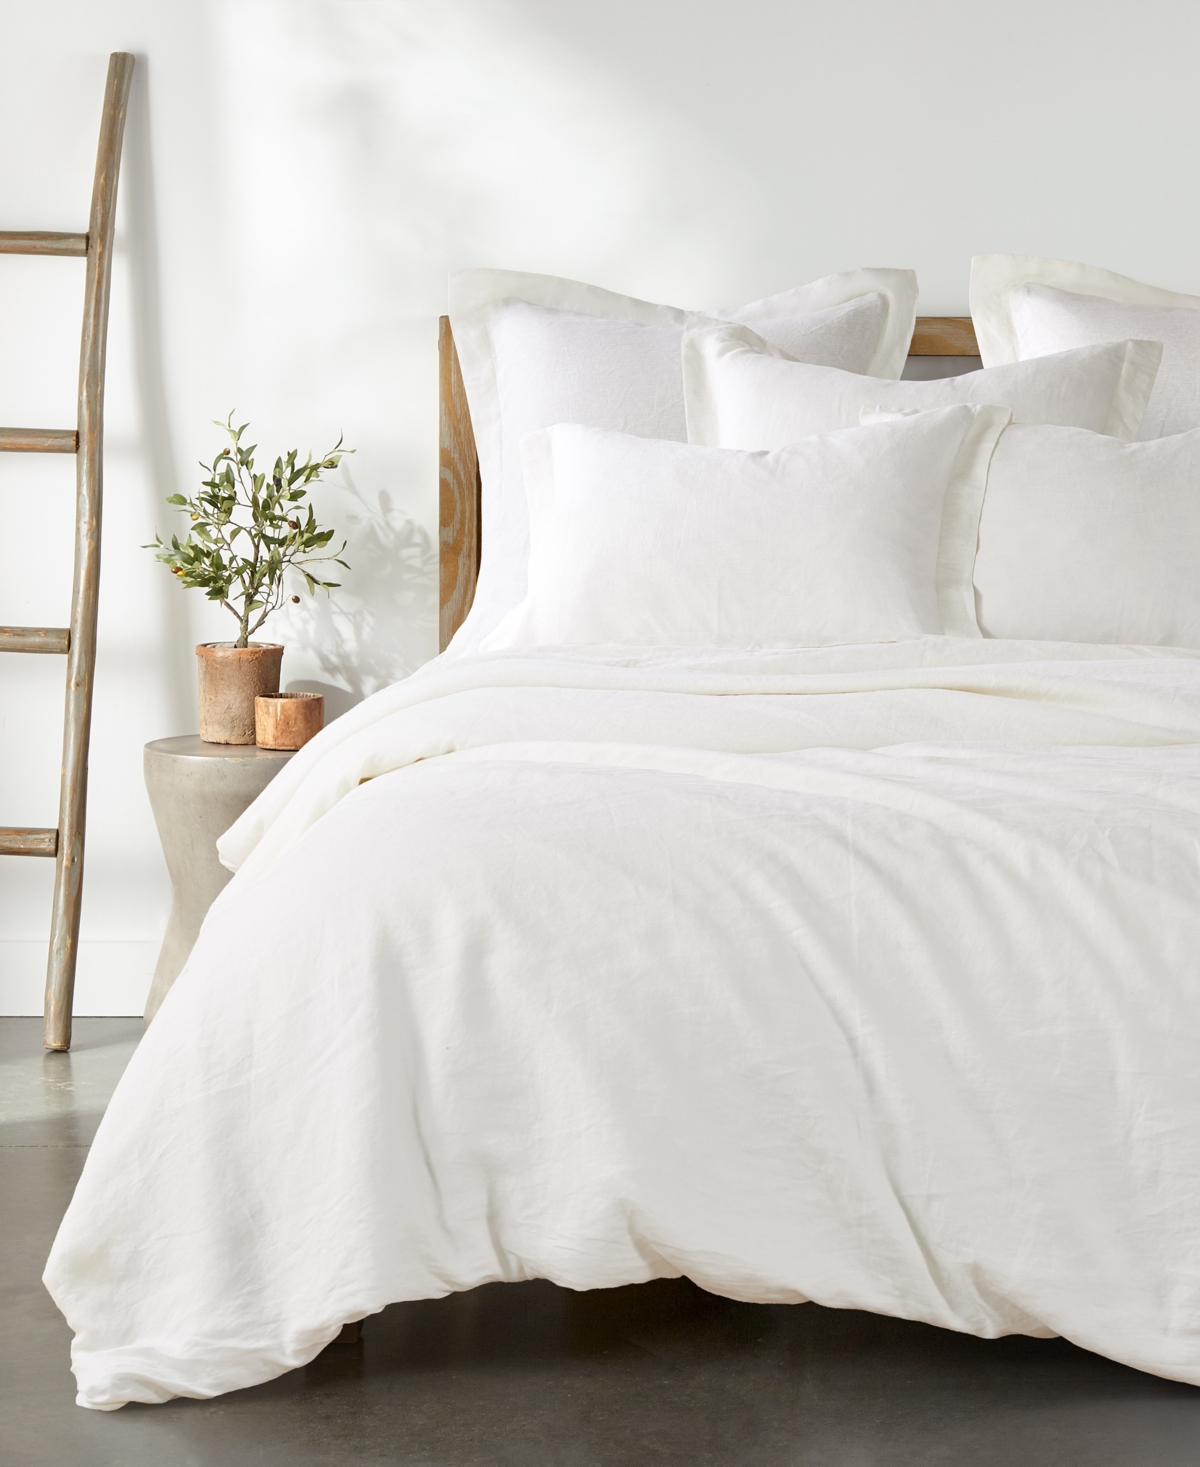 Levtex Washed Linen Solid Duvet Cover, Full/queen In Neutral